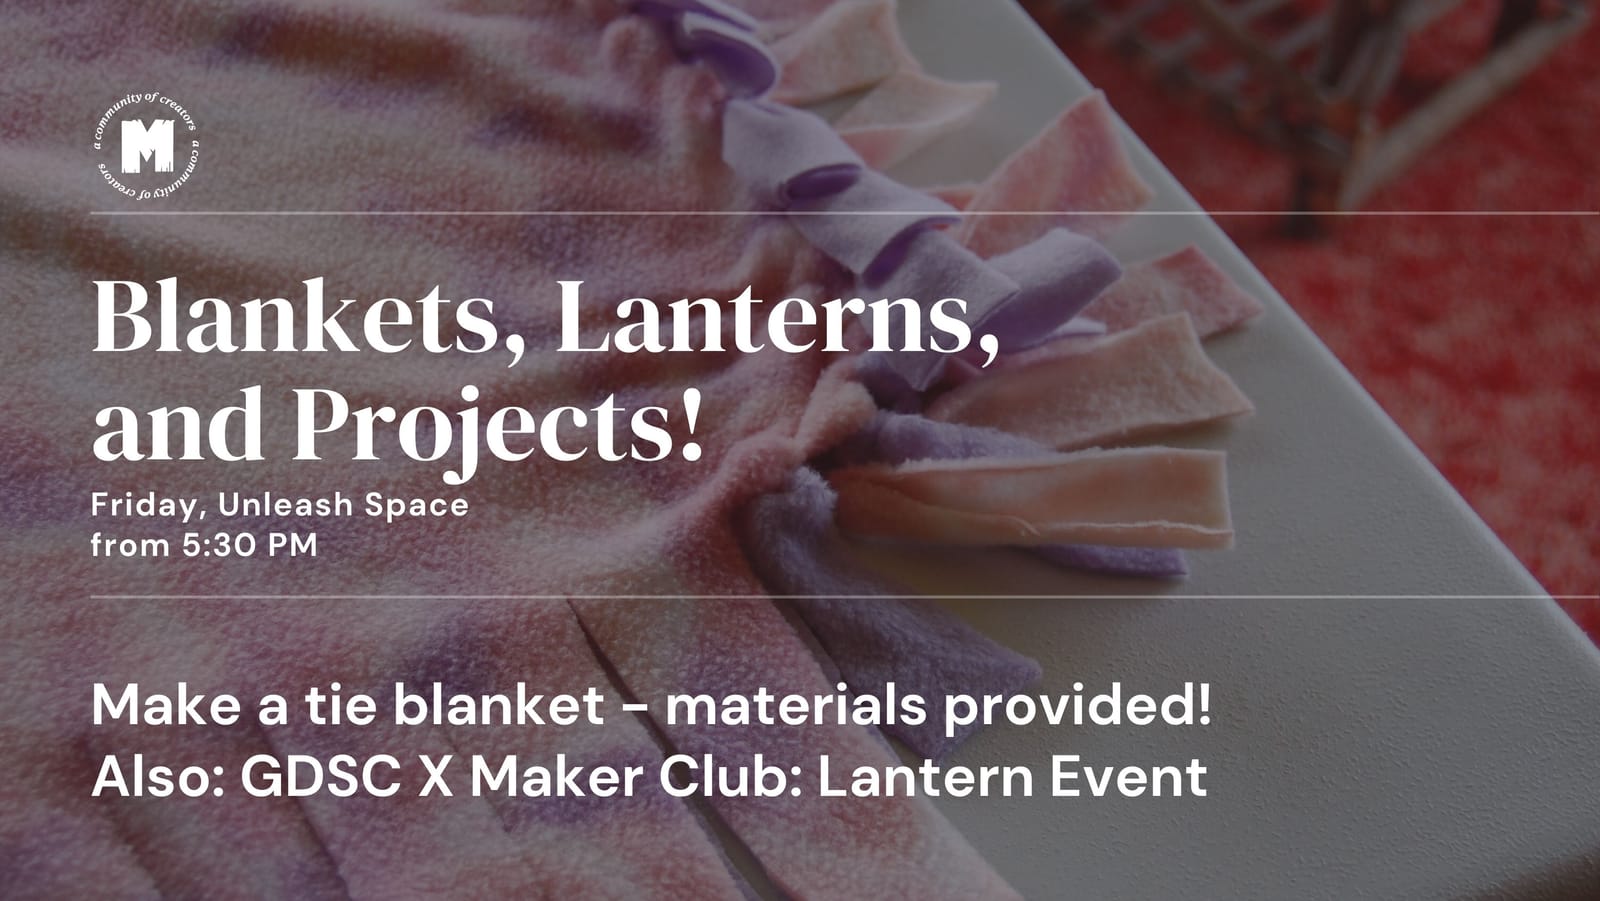 Lanterns, Blankets, and Projects!